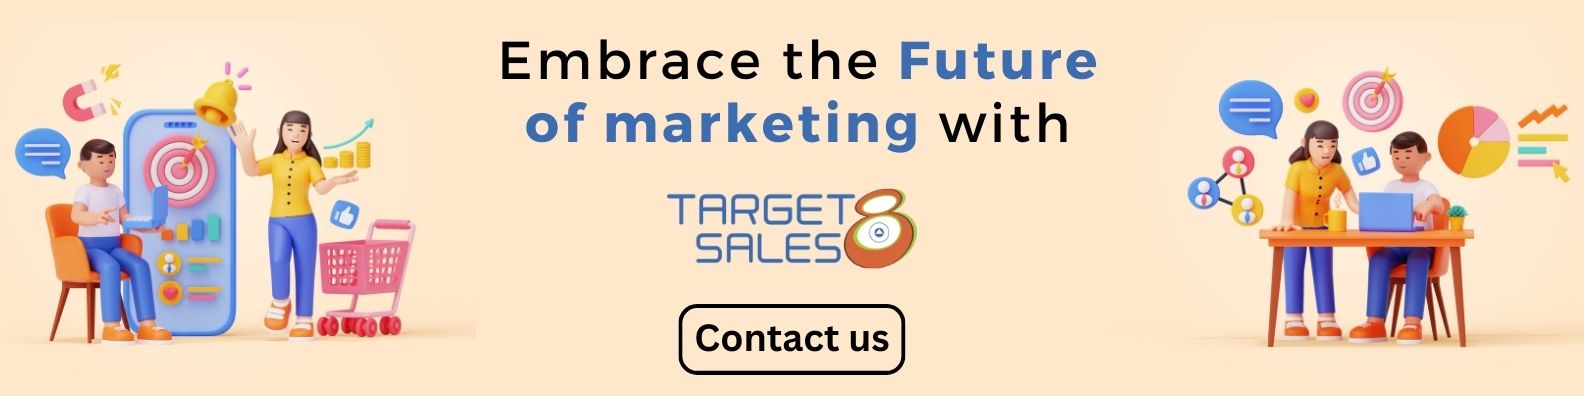 Embrace the Future of marketing with Target 8 Sales